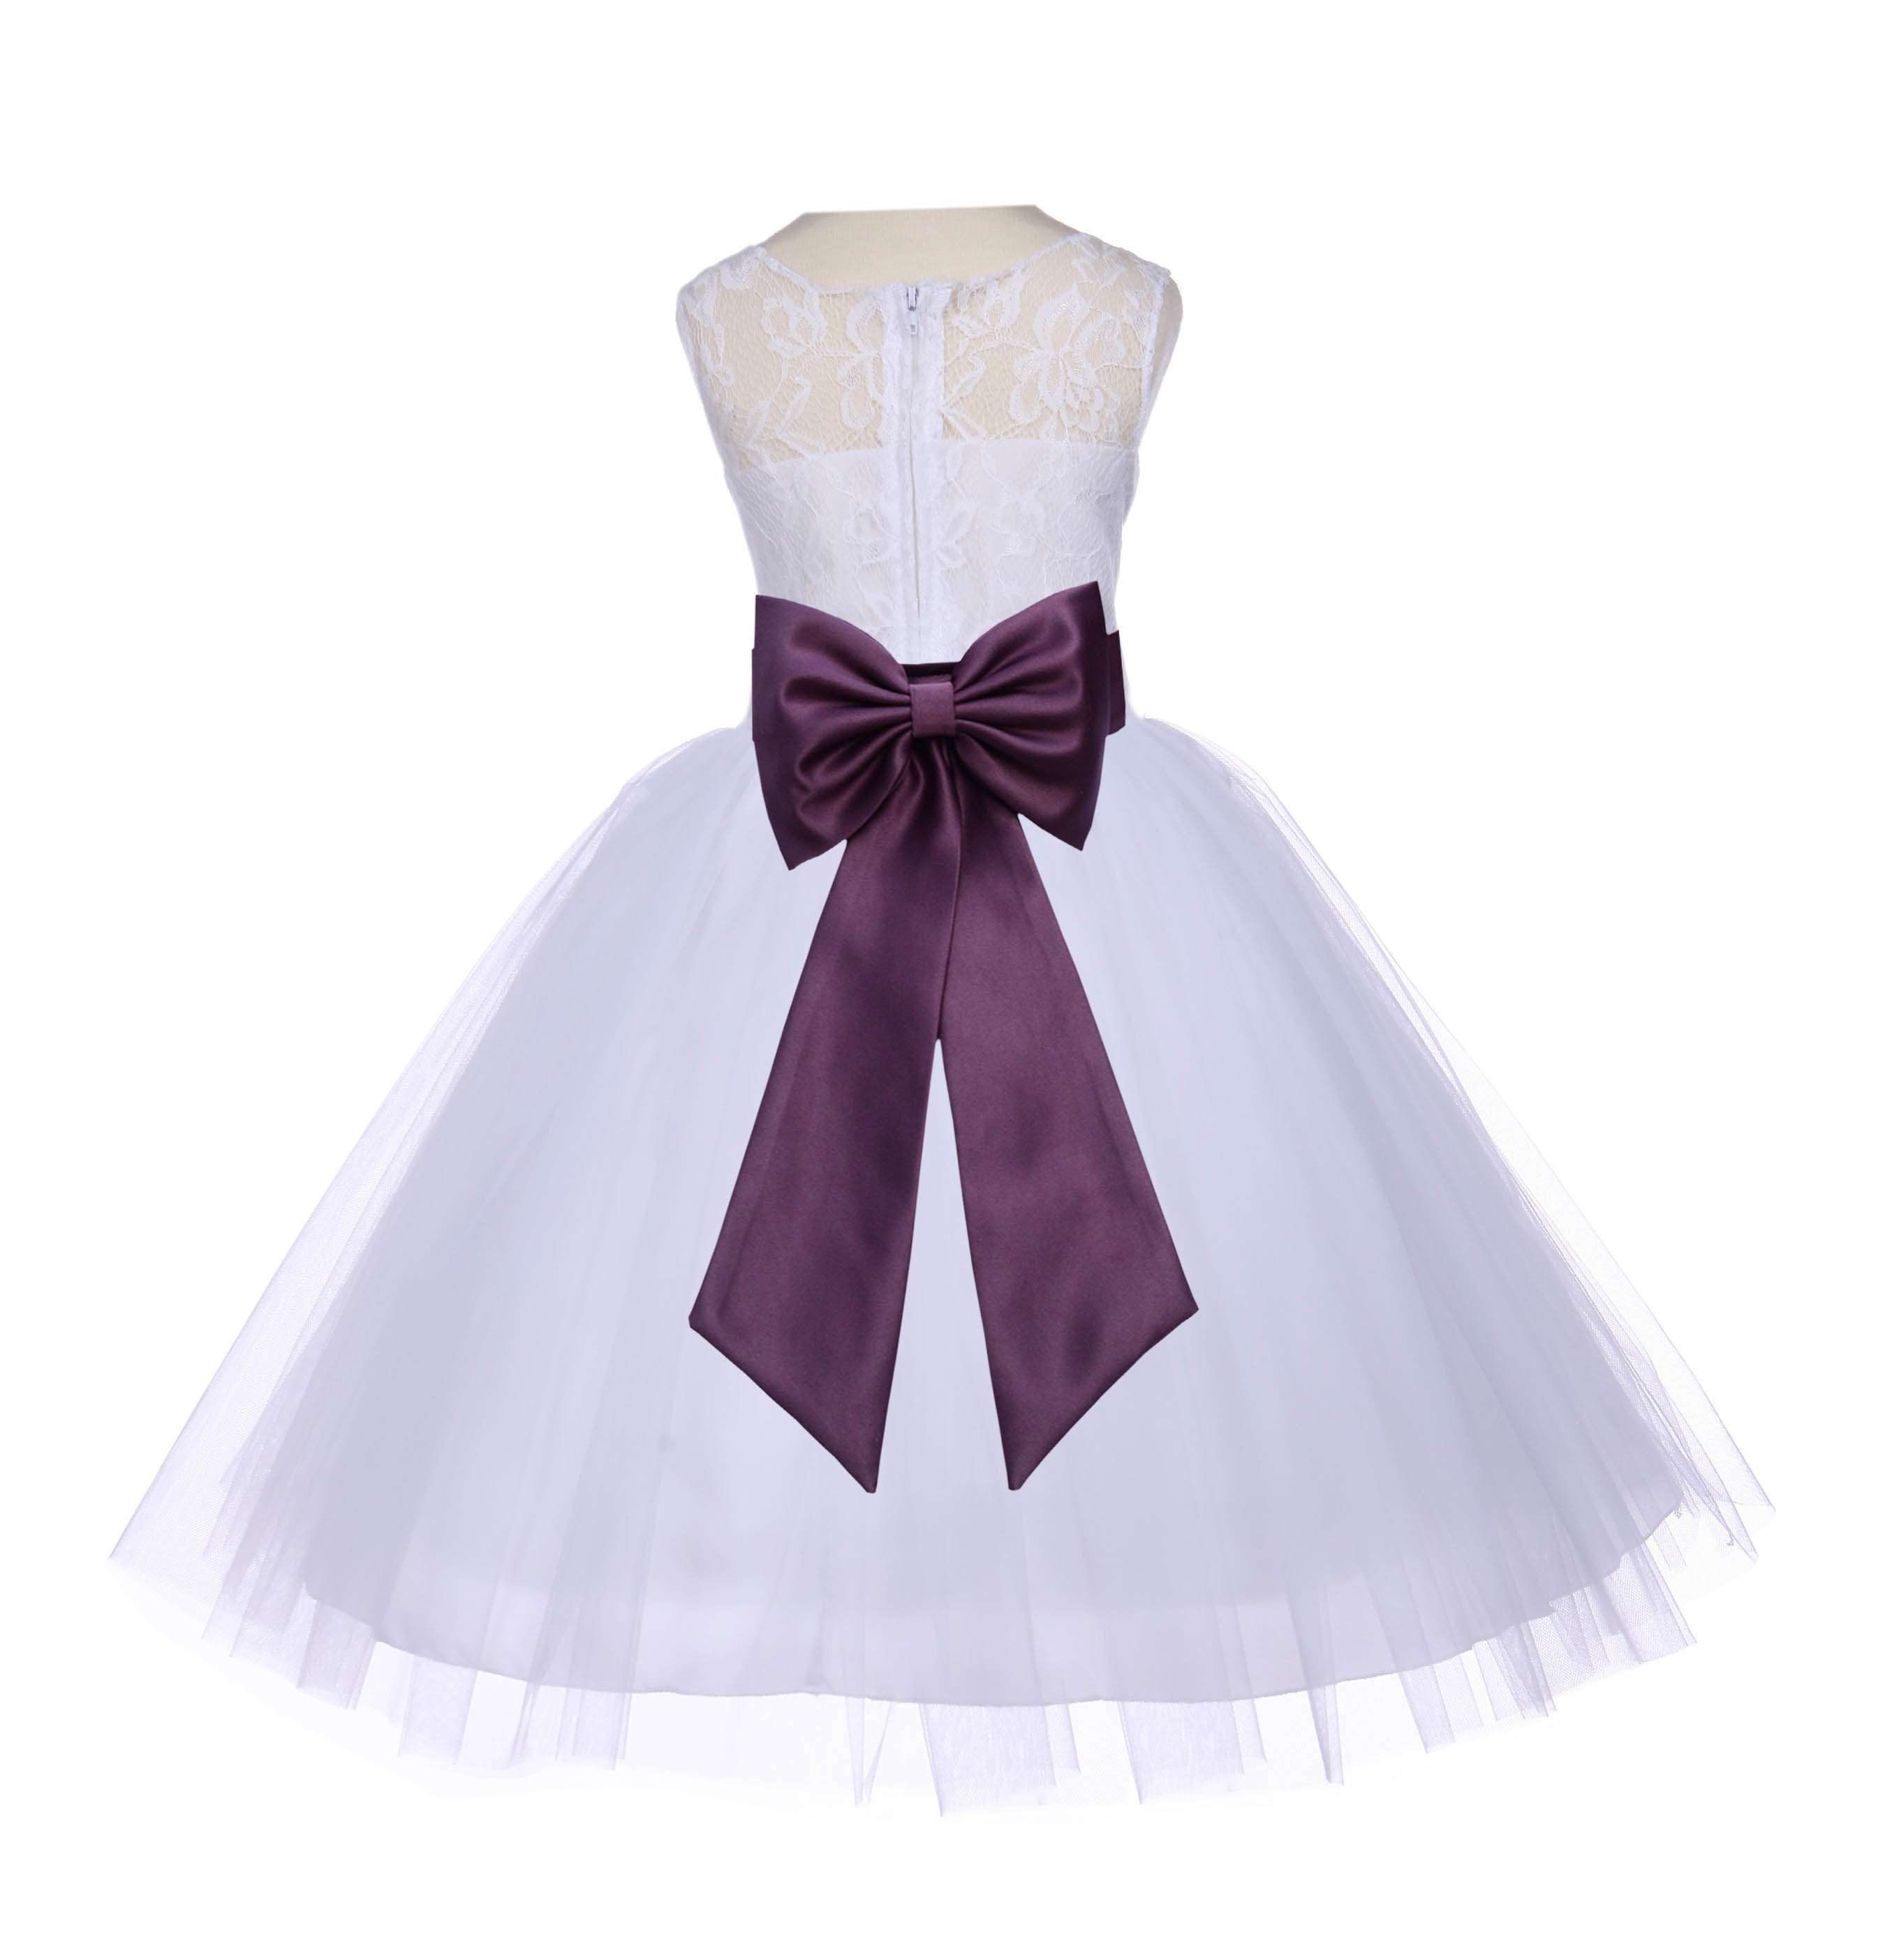 White/Plum Floral Lace Bodice Tulle Flower Girl Dress Wedding 153T